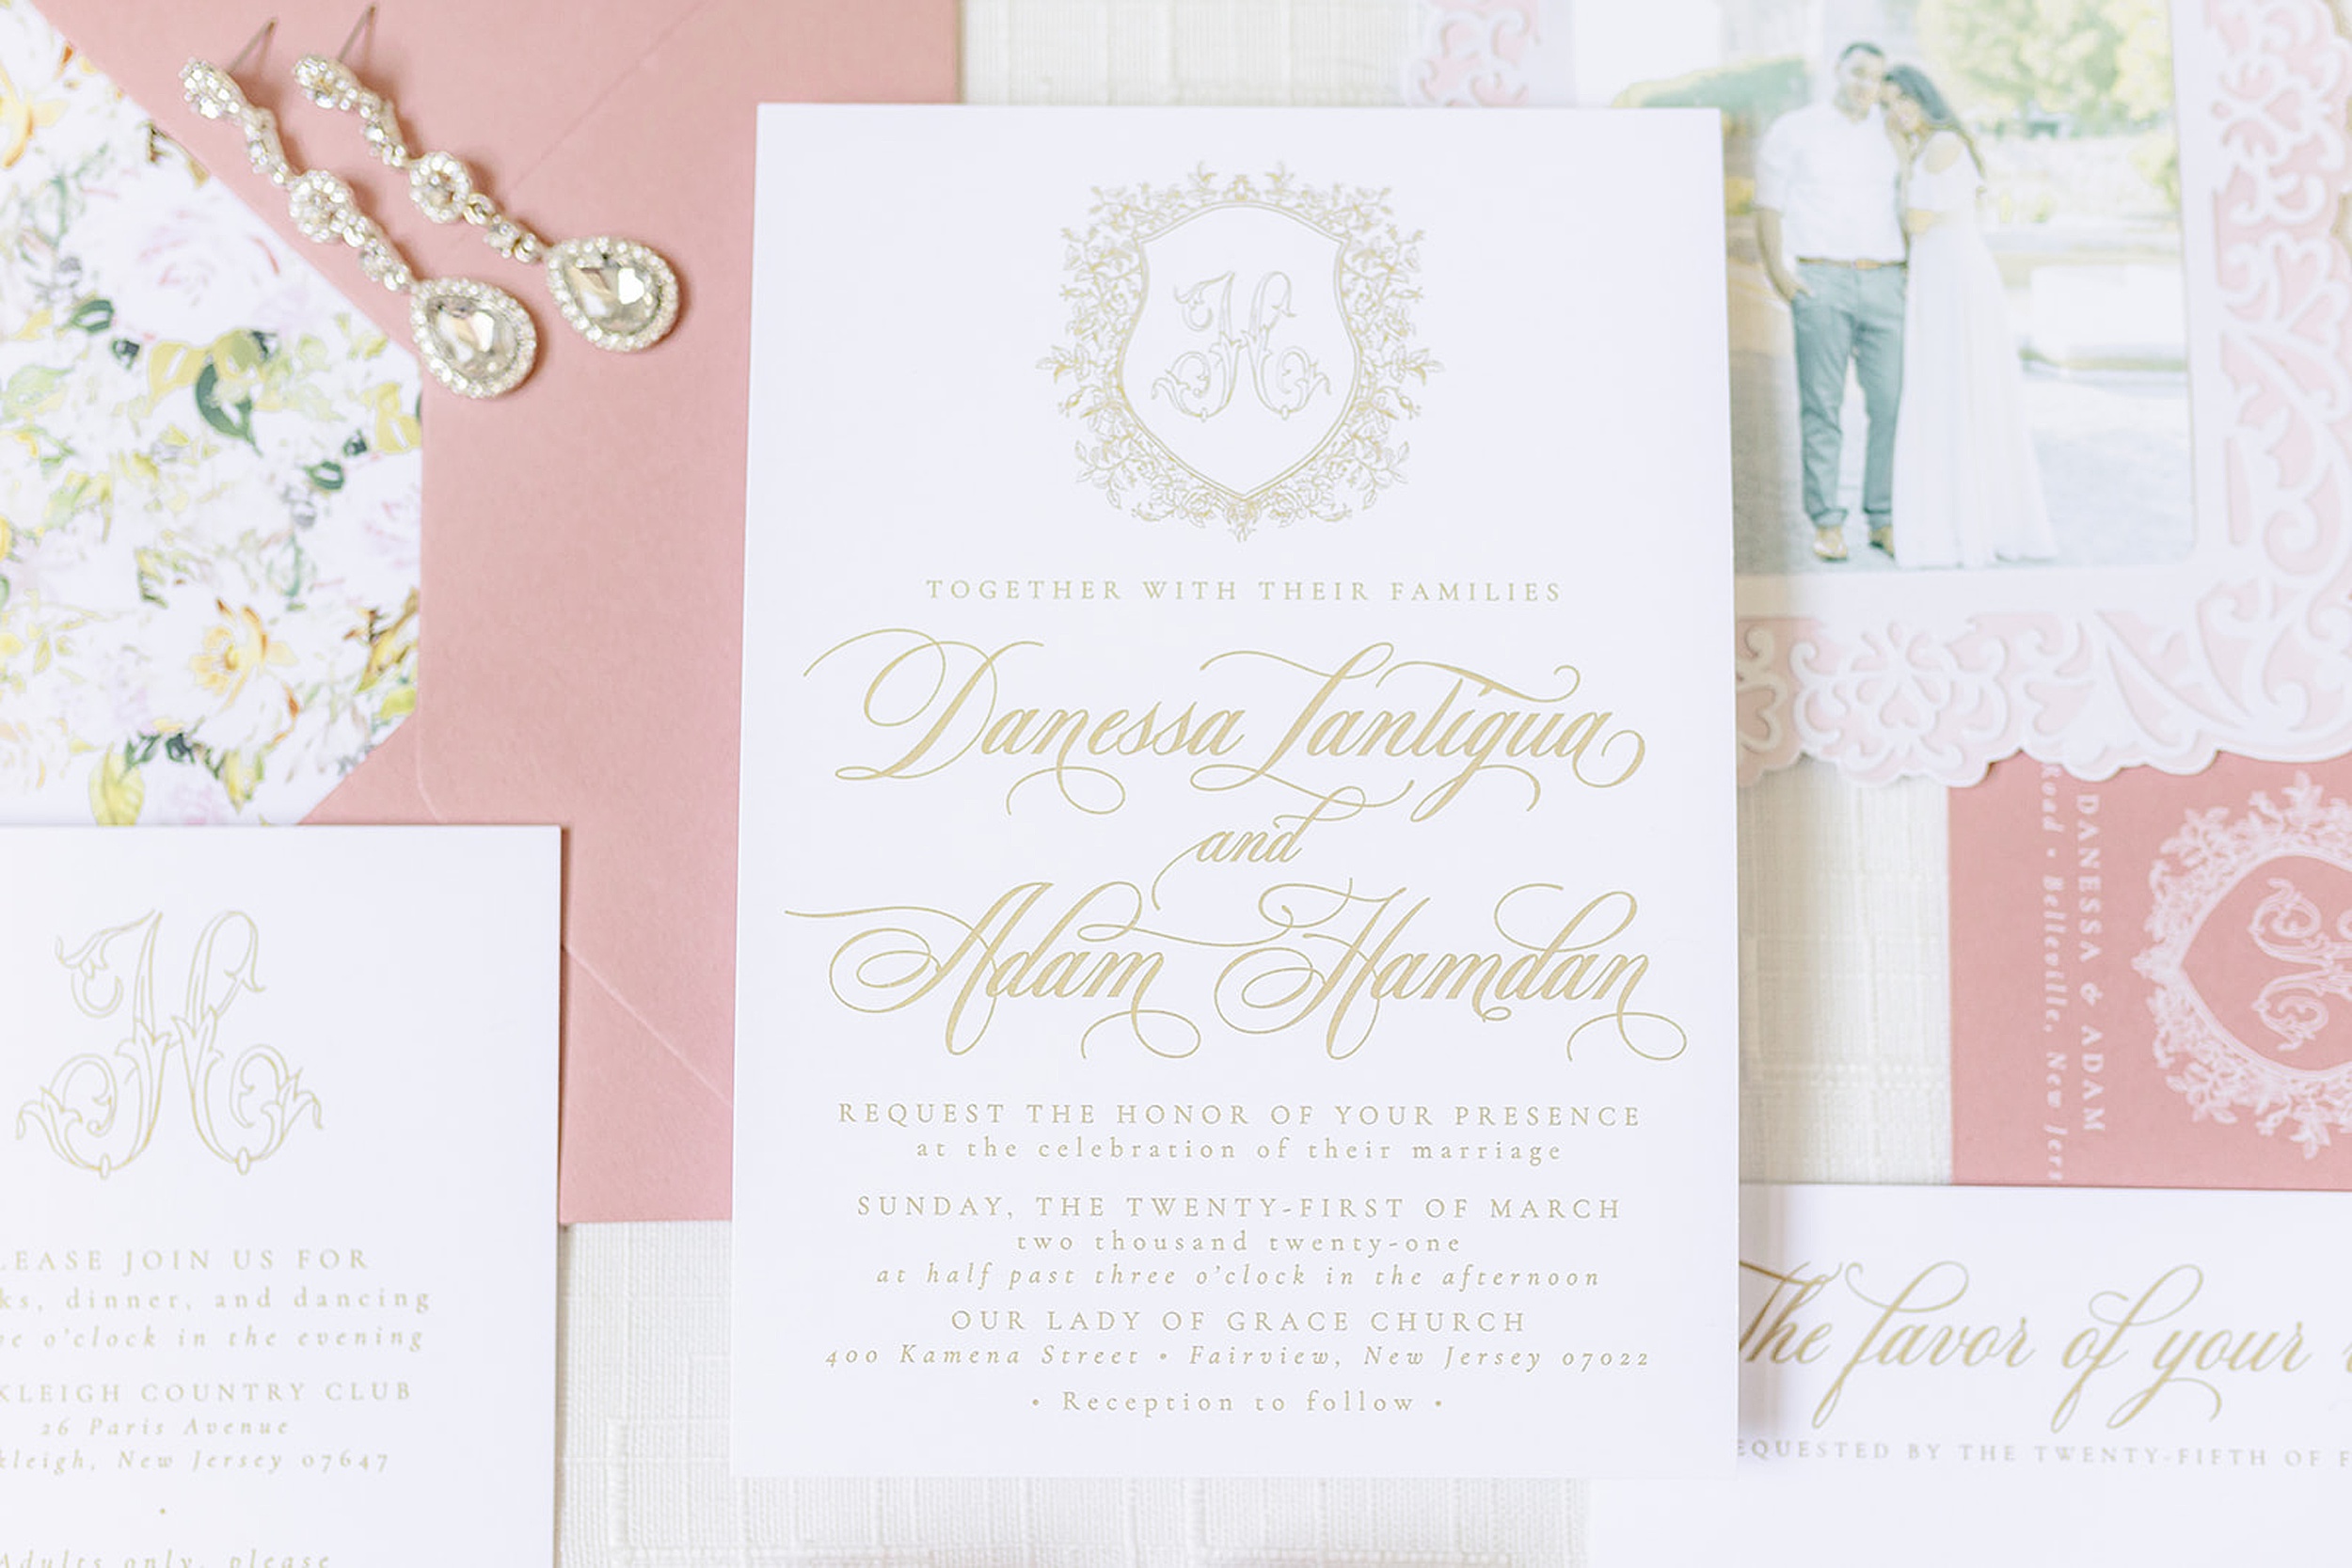 Details of wedding invitations for a wedding